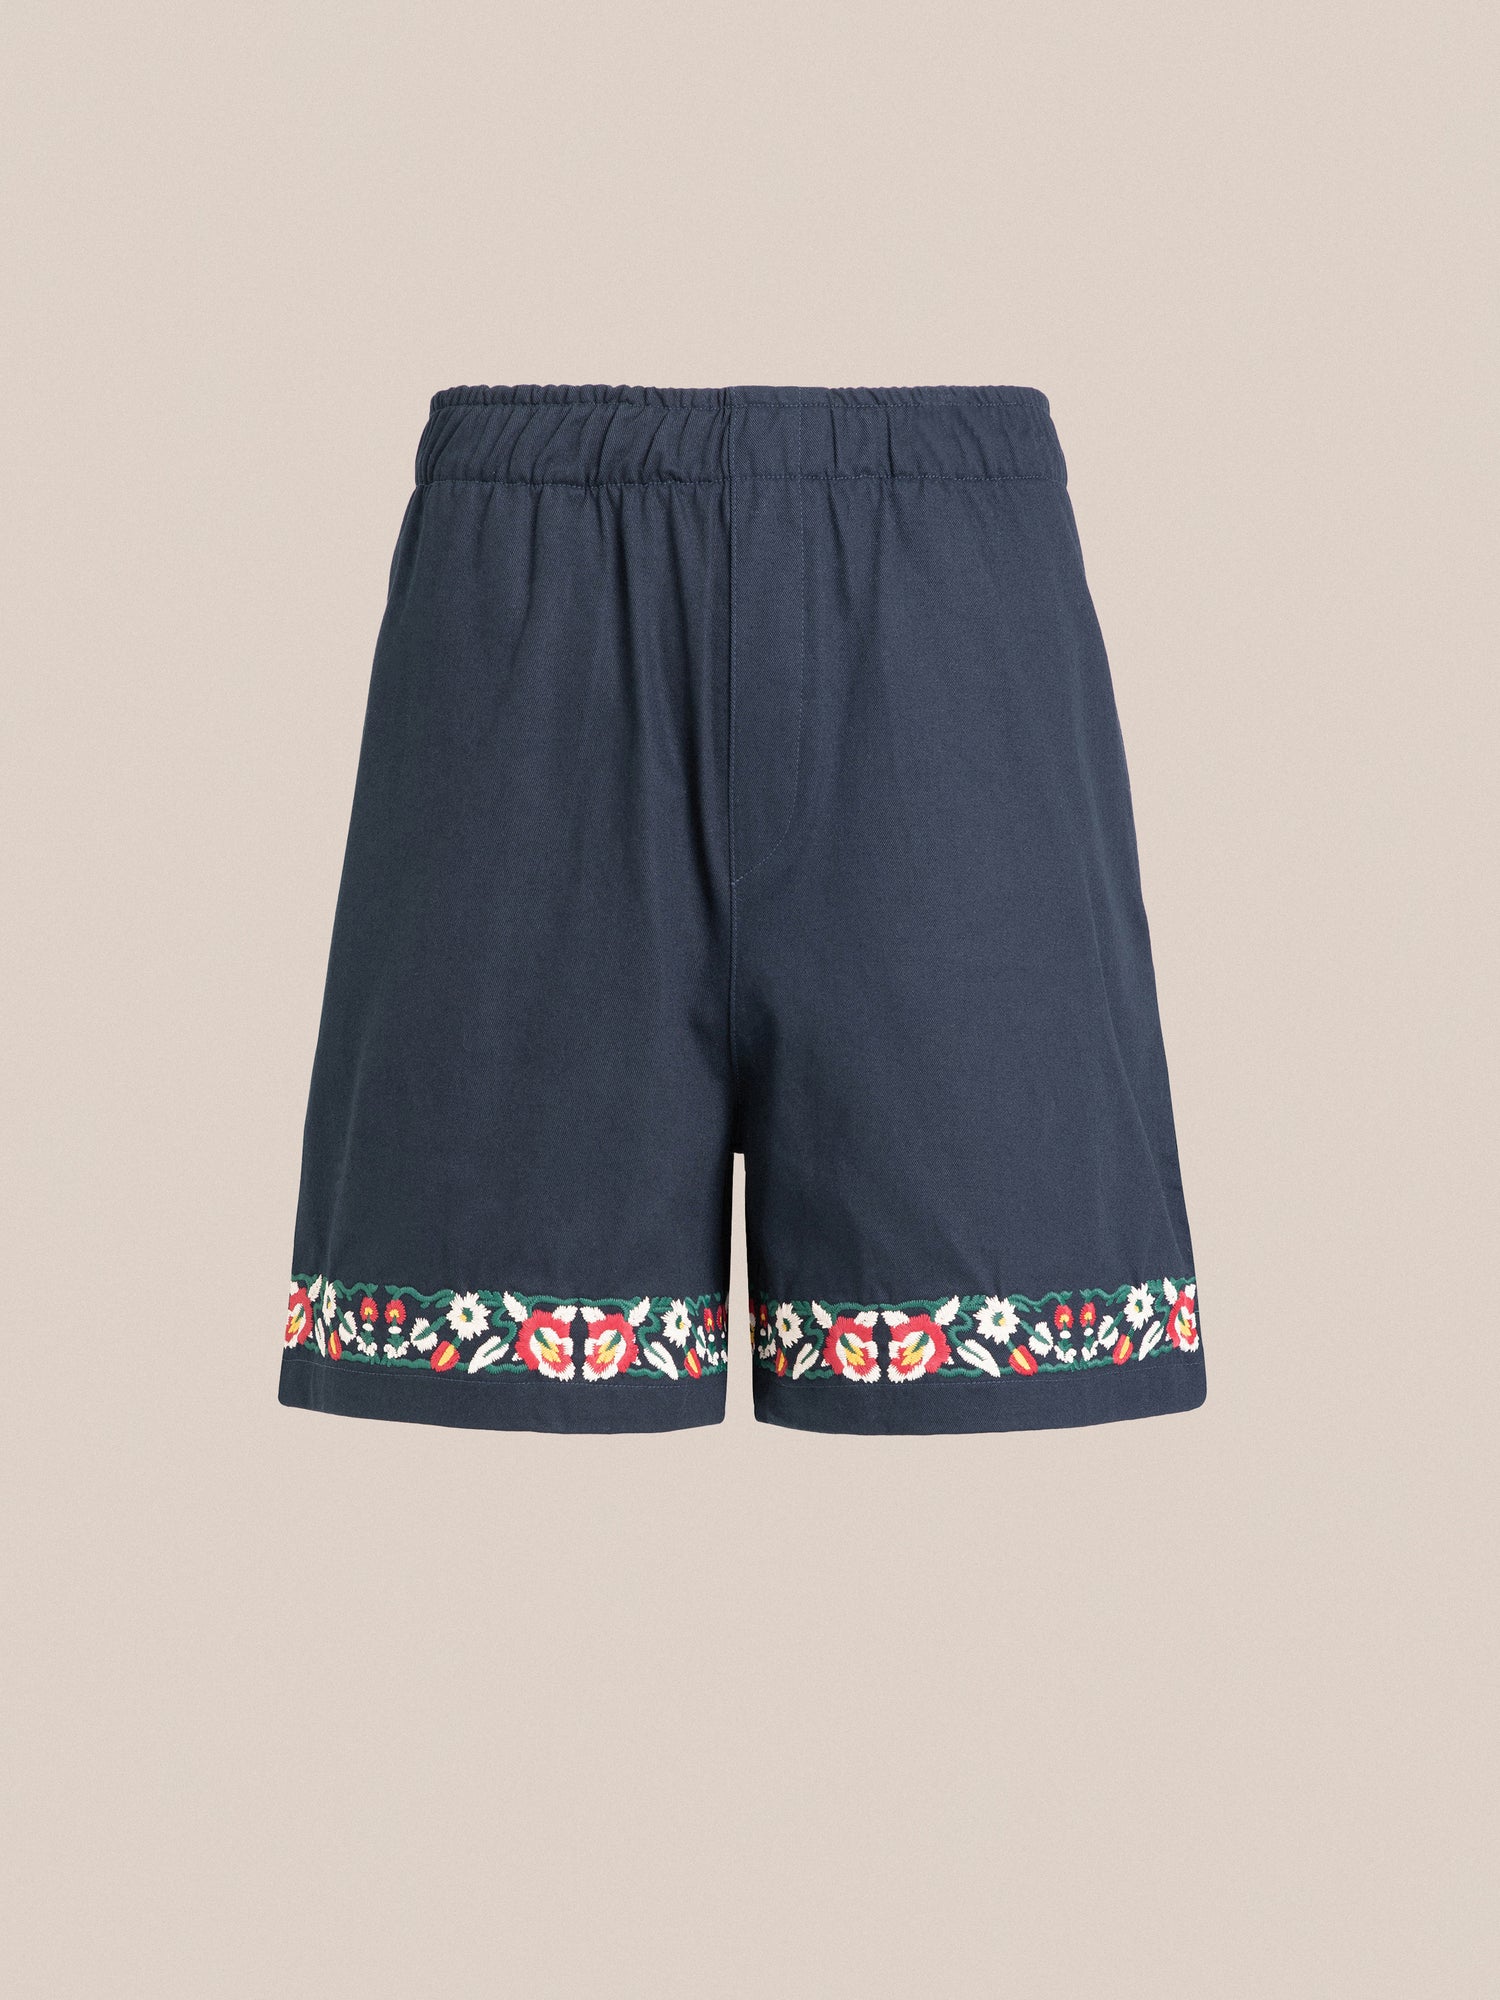 Horse Equine Twill Shorts with an elastic waistband and a floral print border at the hem, displayed against a neutral background by Found.